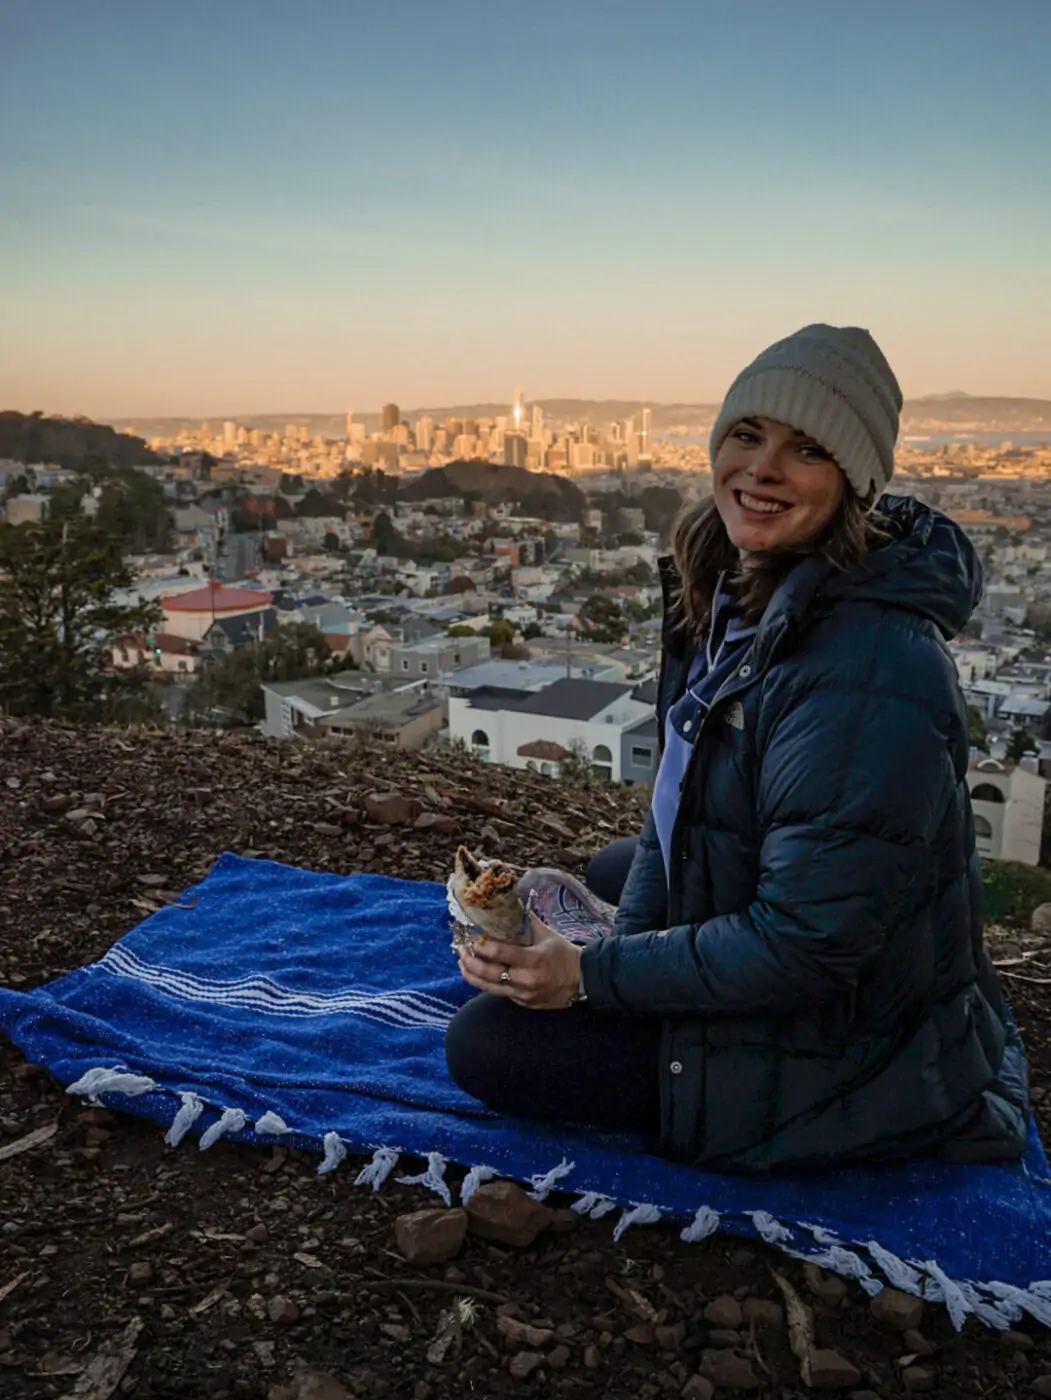 Me at Tank Hill watching sunset in San Francisco while eating a Mission style burrito.